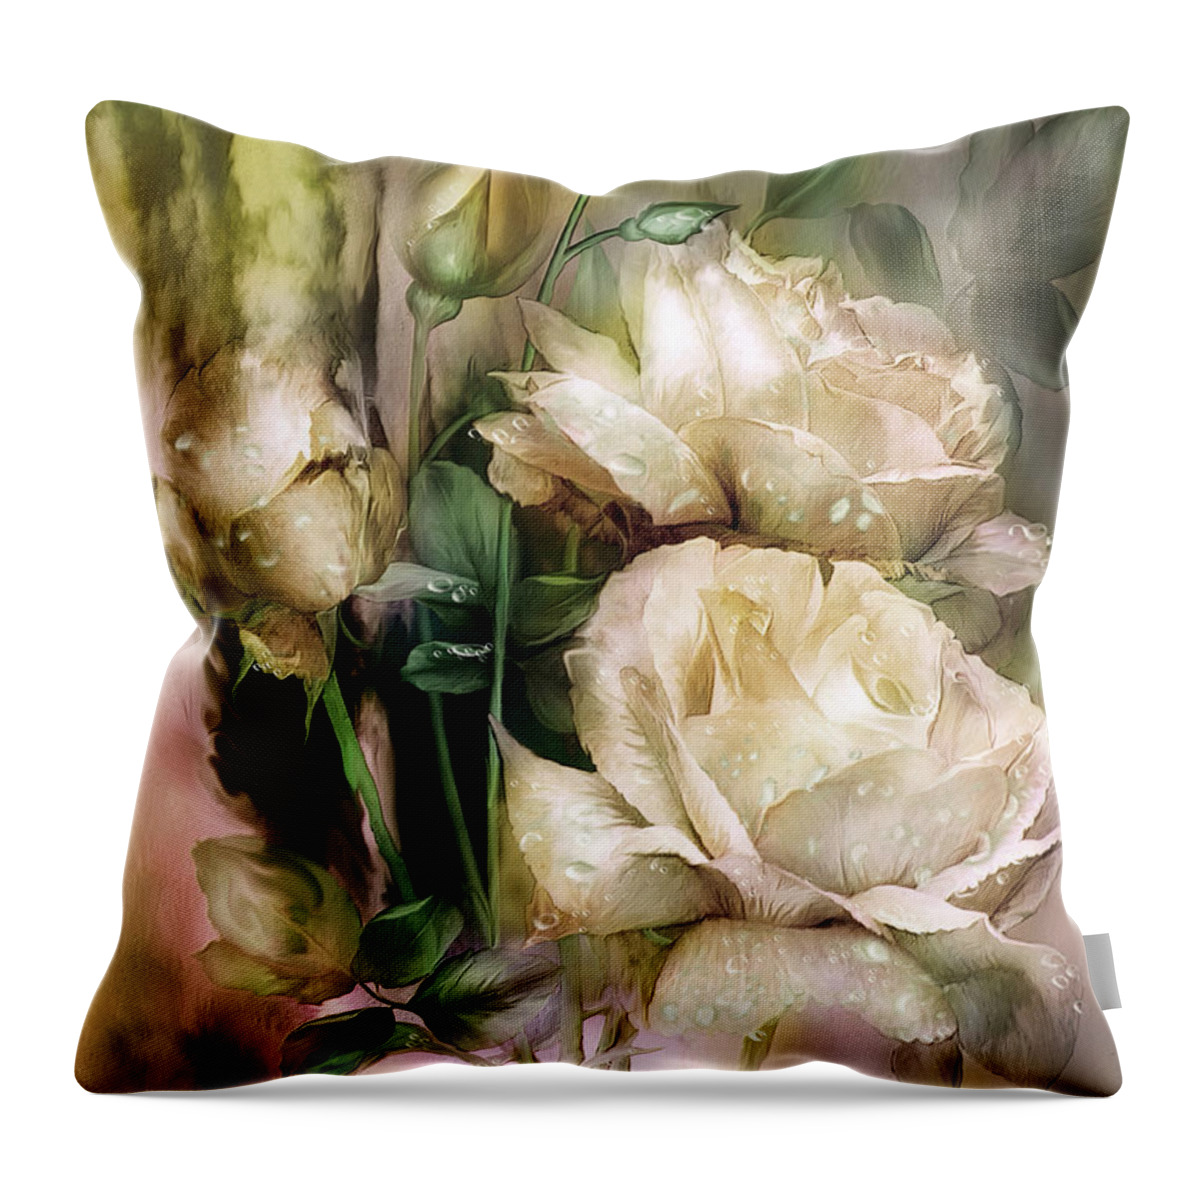 Rose Throw Pillow featuring the mixed media Raindrops On Antique White Roses by Carol Cavalaris